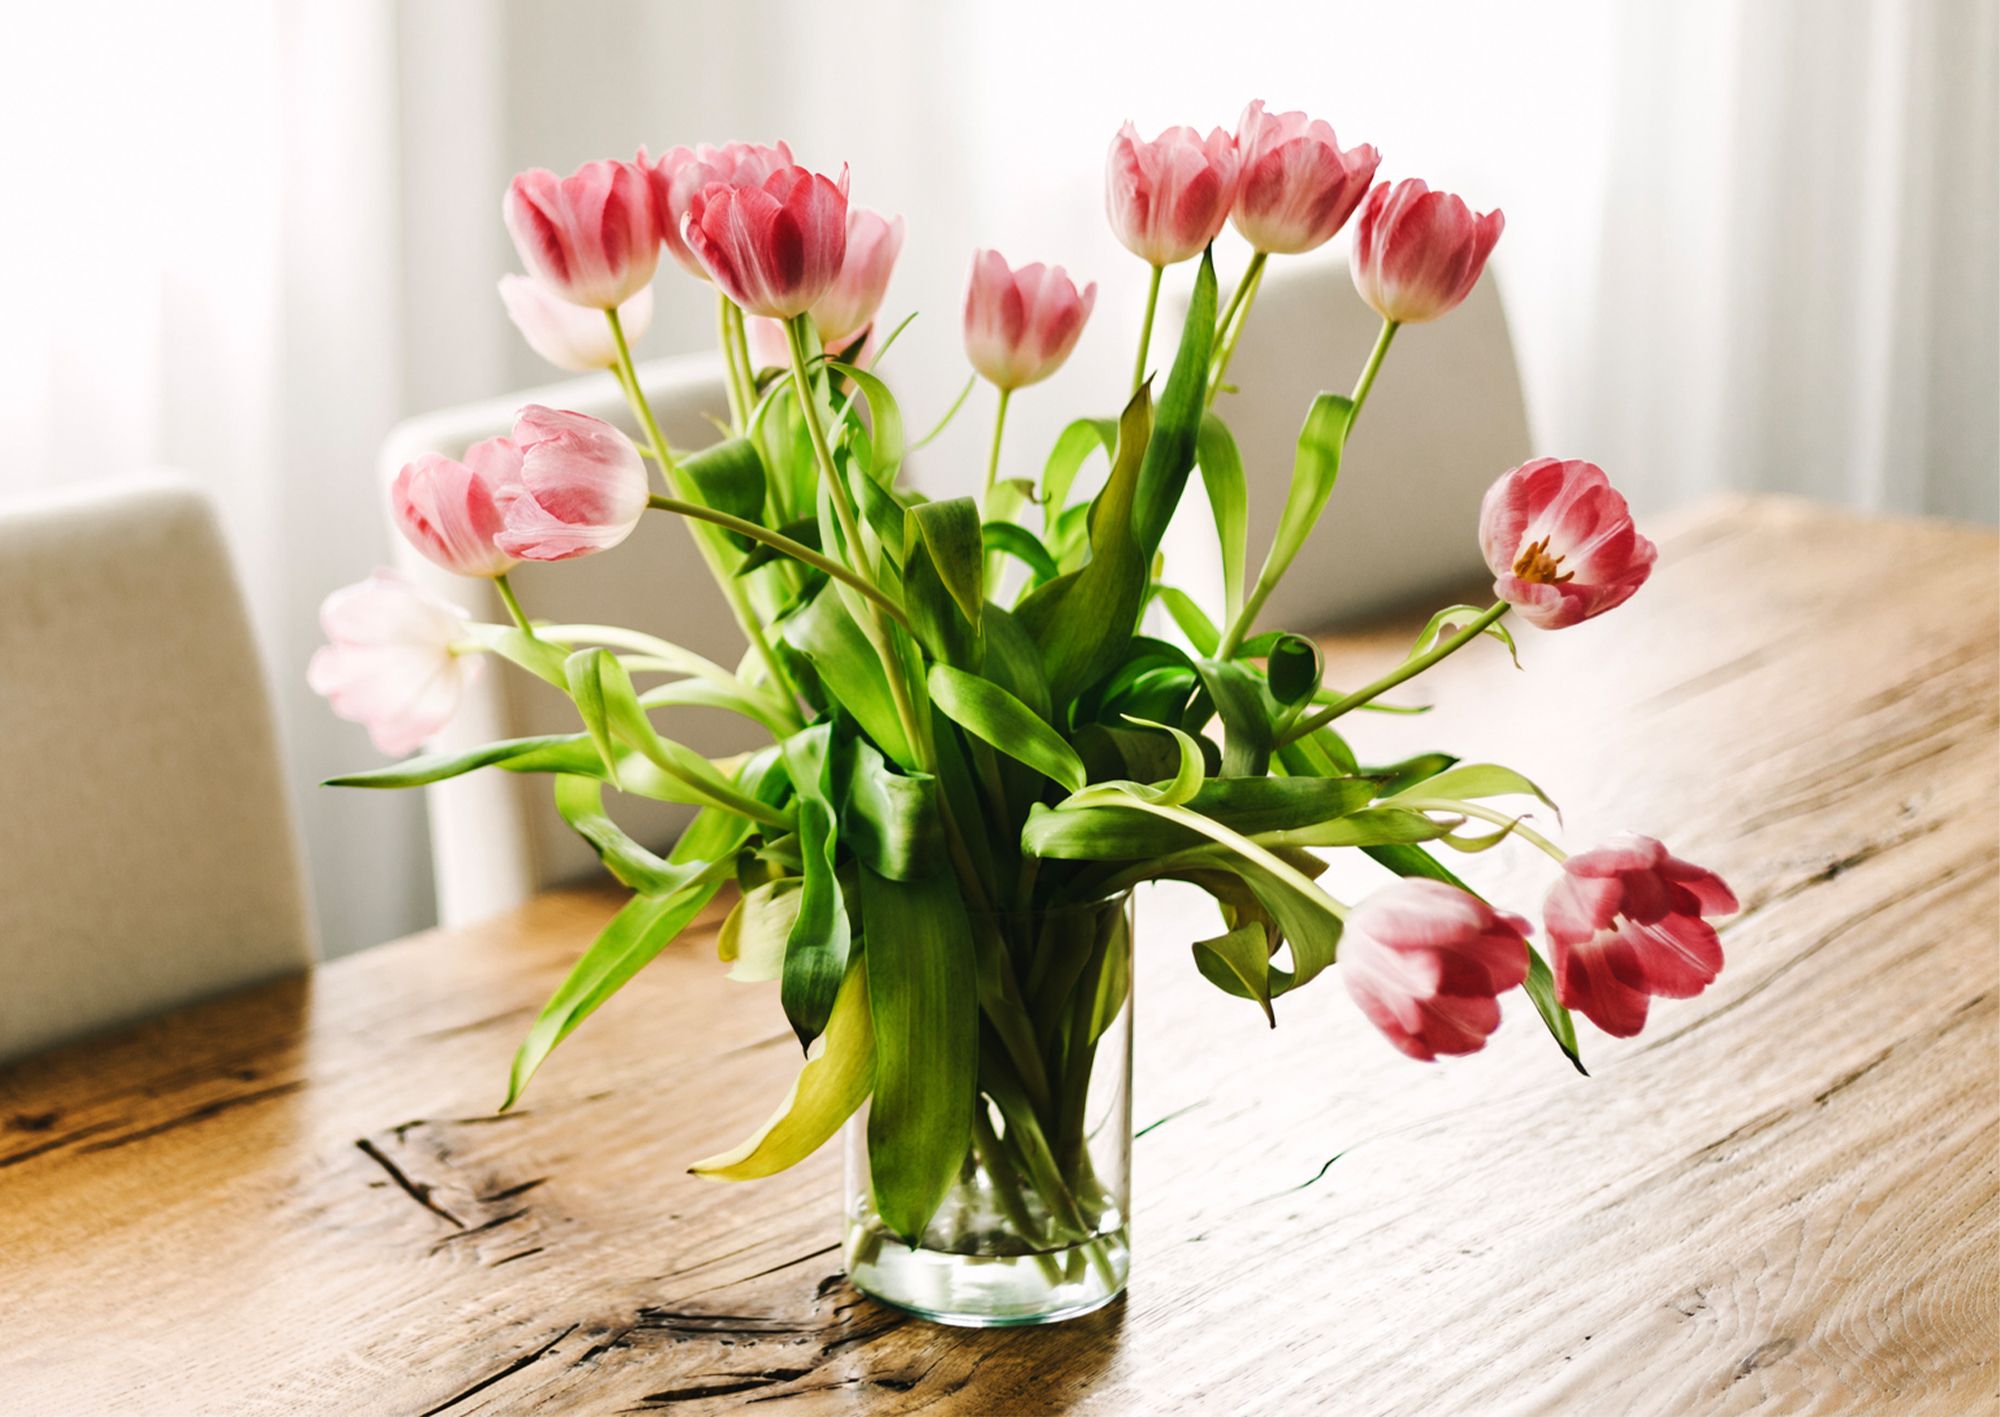 Tips to keep your flowers fresh